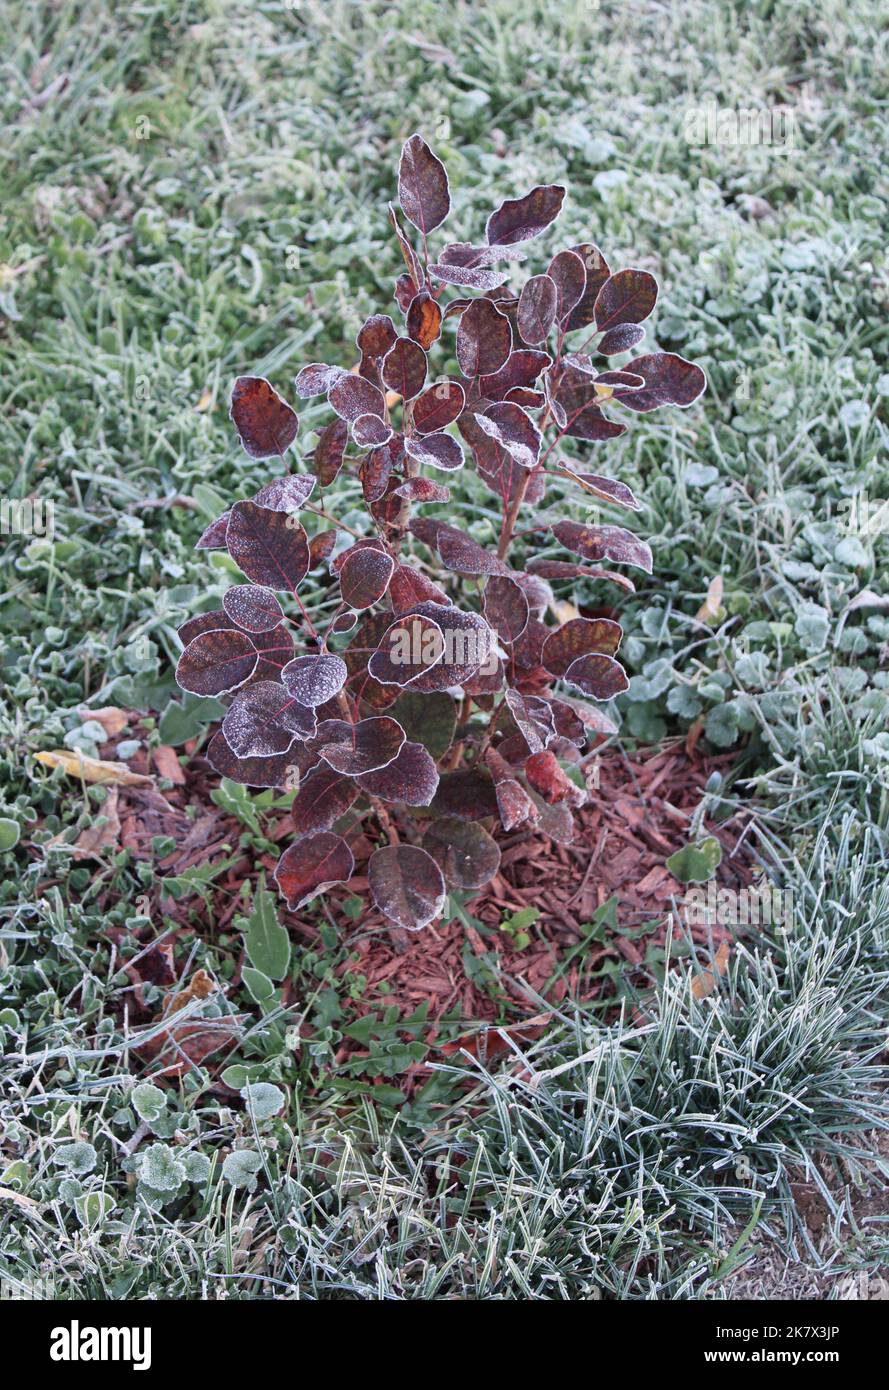 Frost on The Edges of Leaves of a Young Purple Smokebush Stock Photo